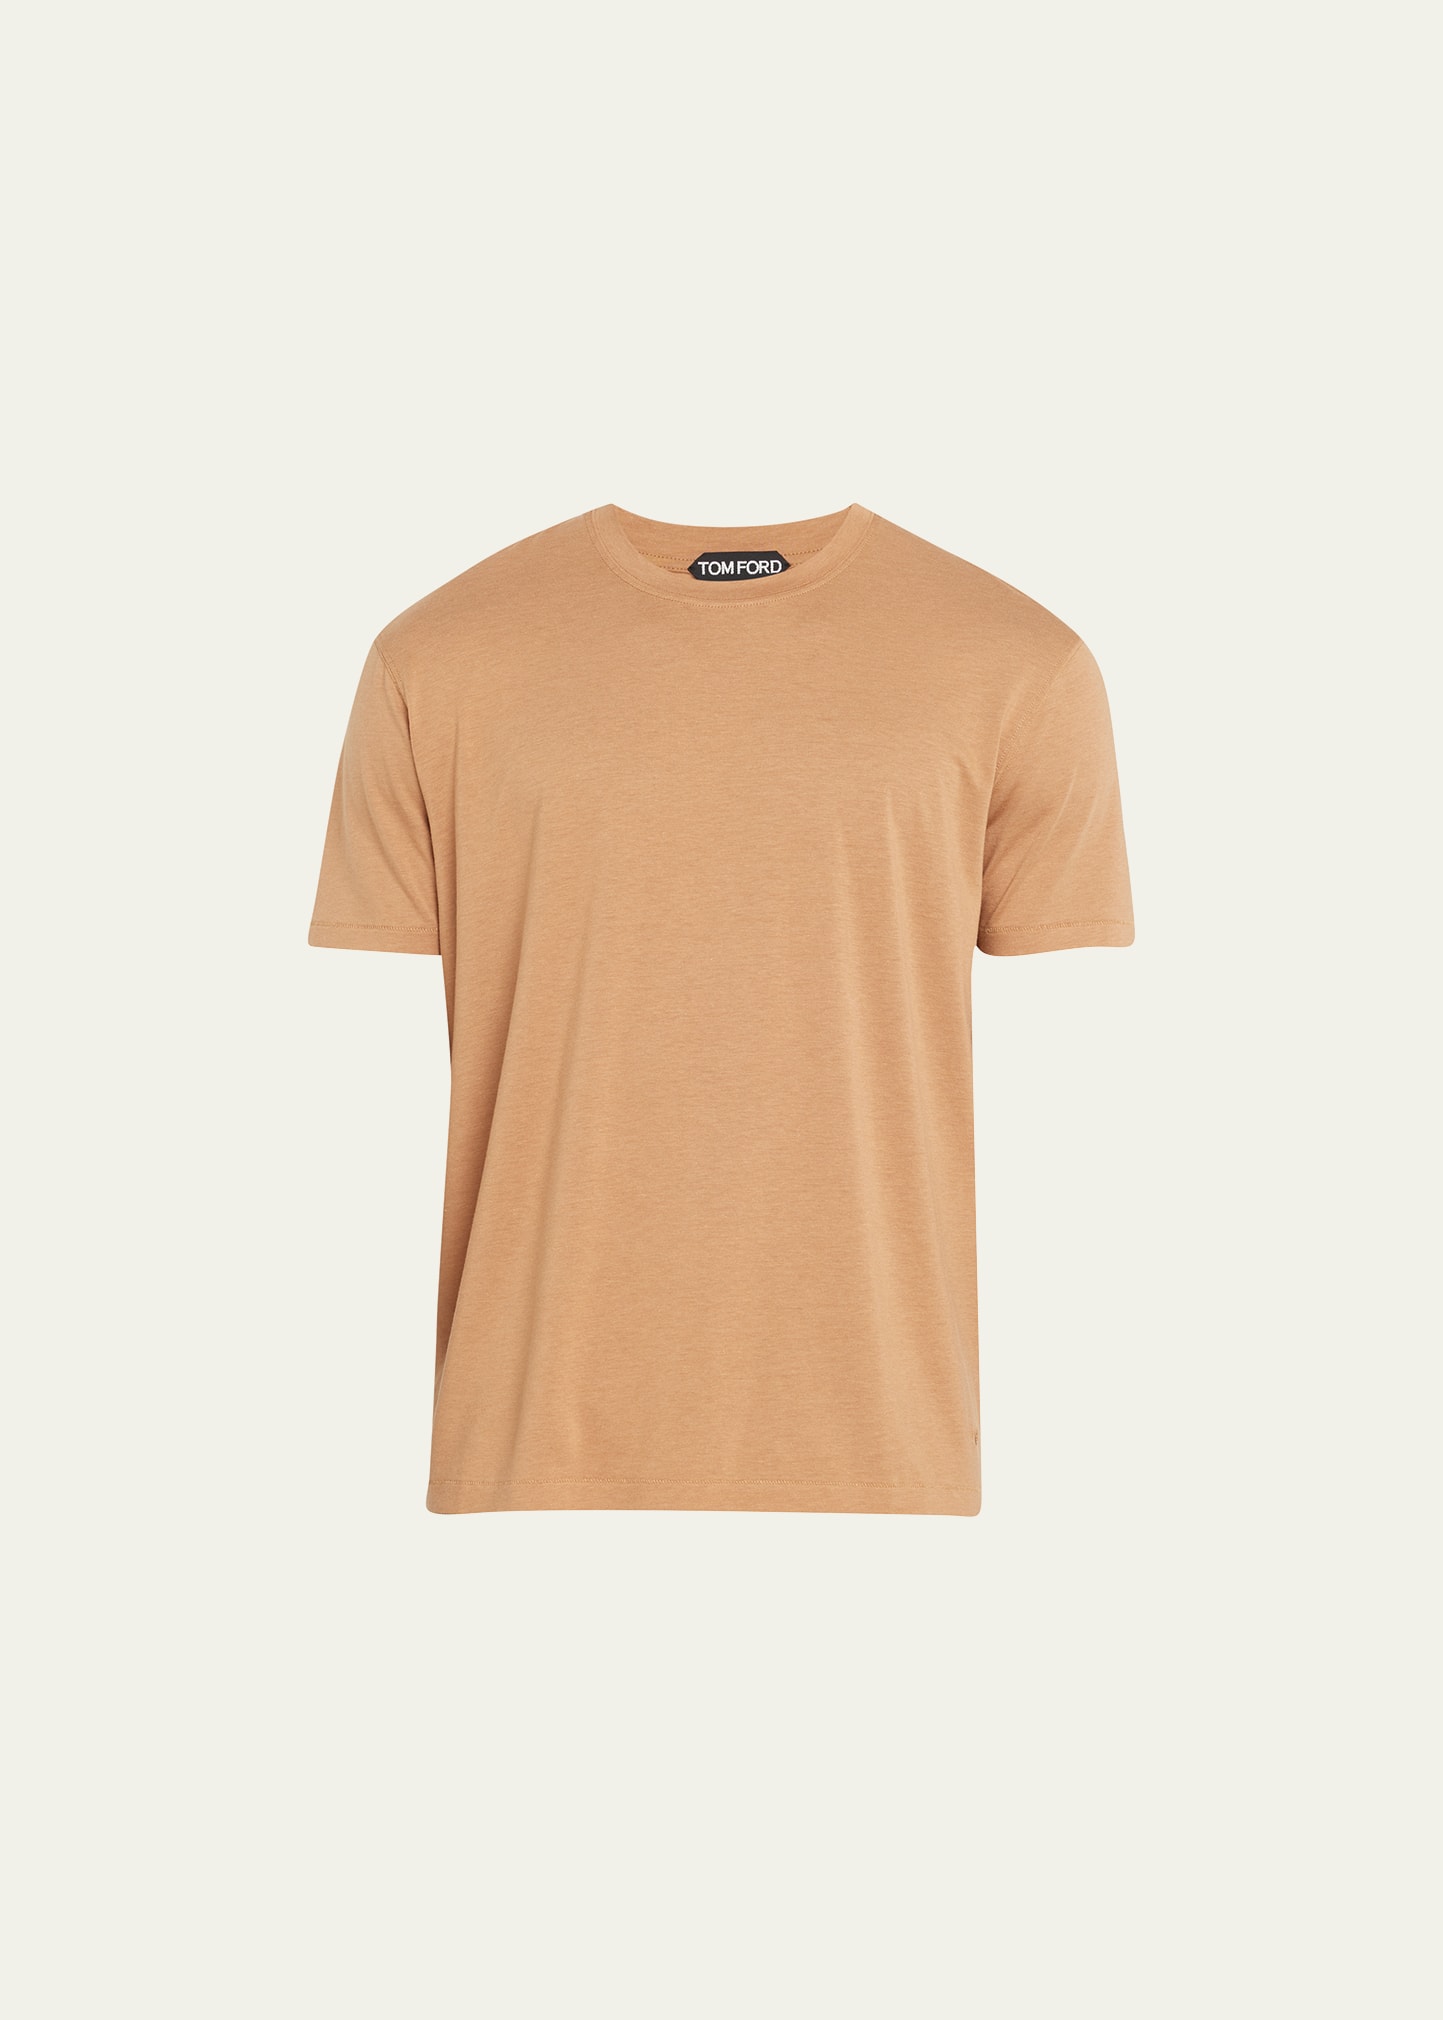 Tom Ford Men's Lyocell-cotton Crewneck T-shirt In Toffee